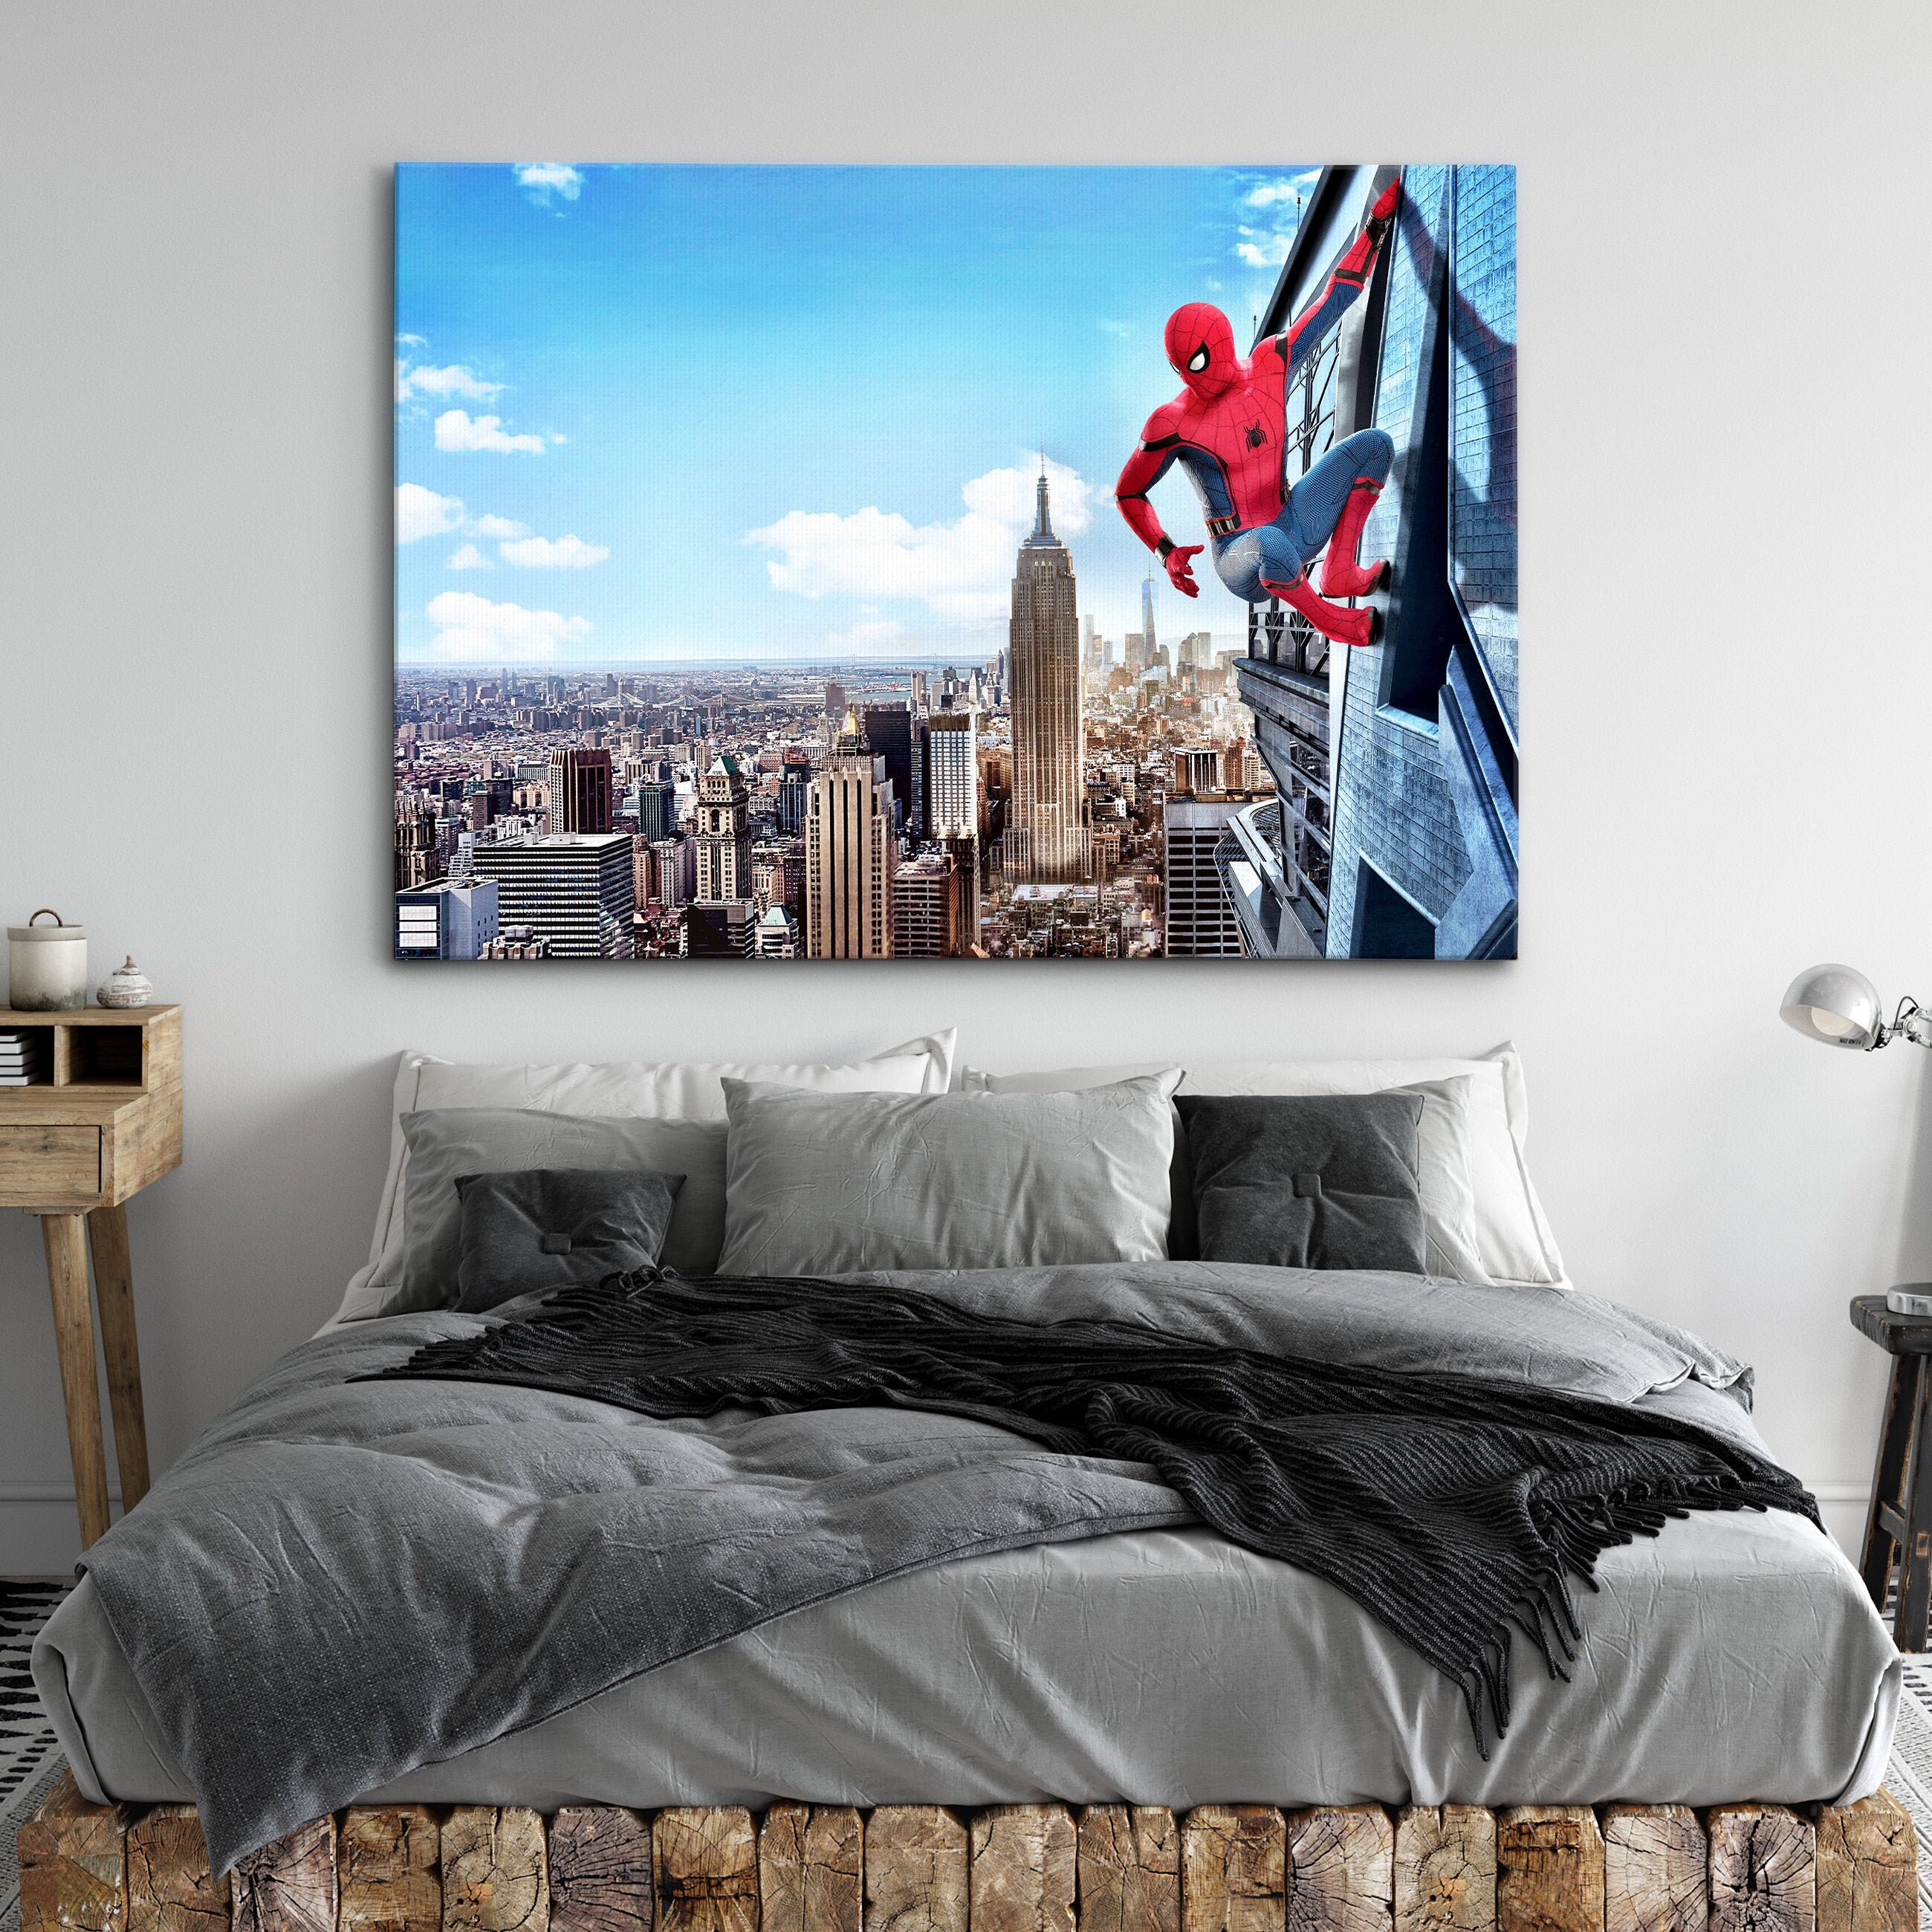 CANVAS ART - Spider Man New York City MovieFilm Art Red & Blue High Quality Framed Canvas Wall Art Poster Print HomeOffice Room Decor Gift